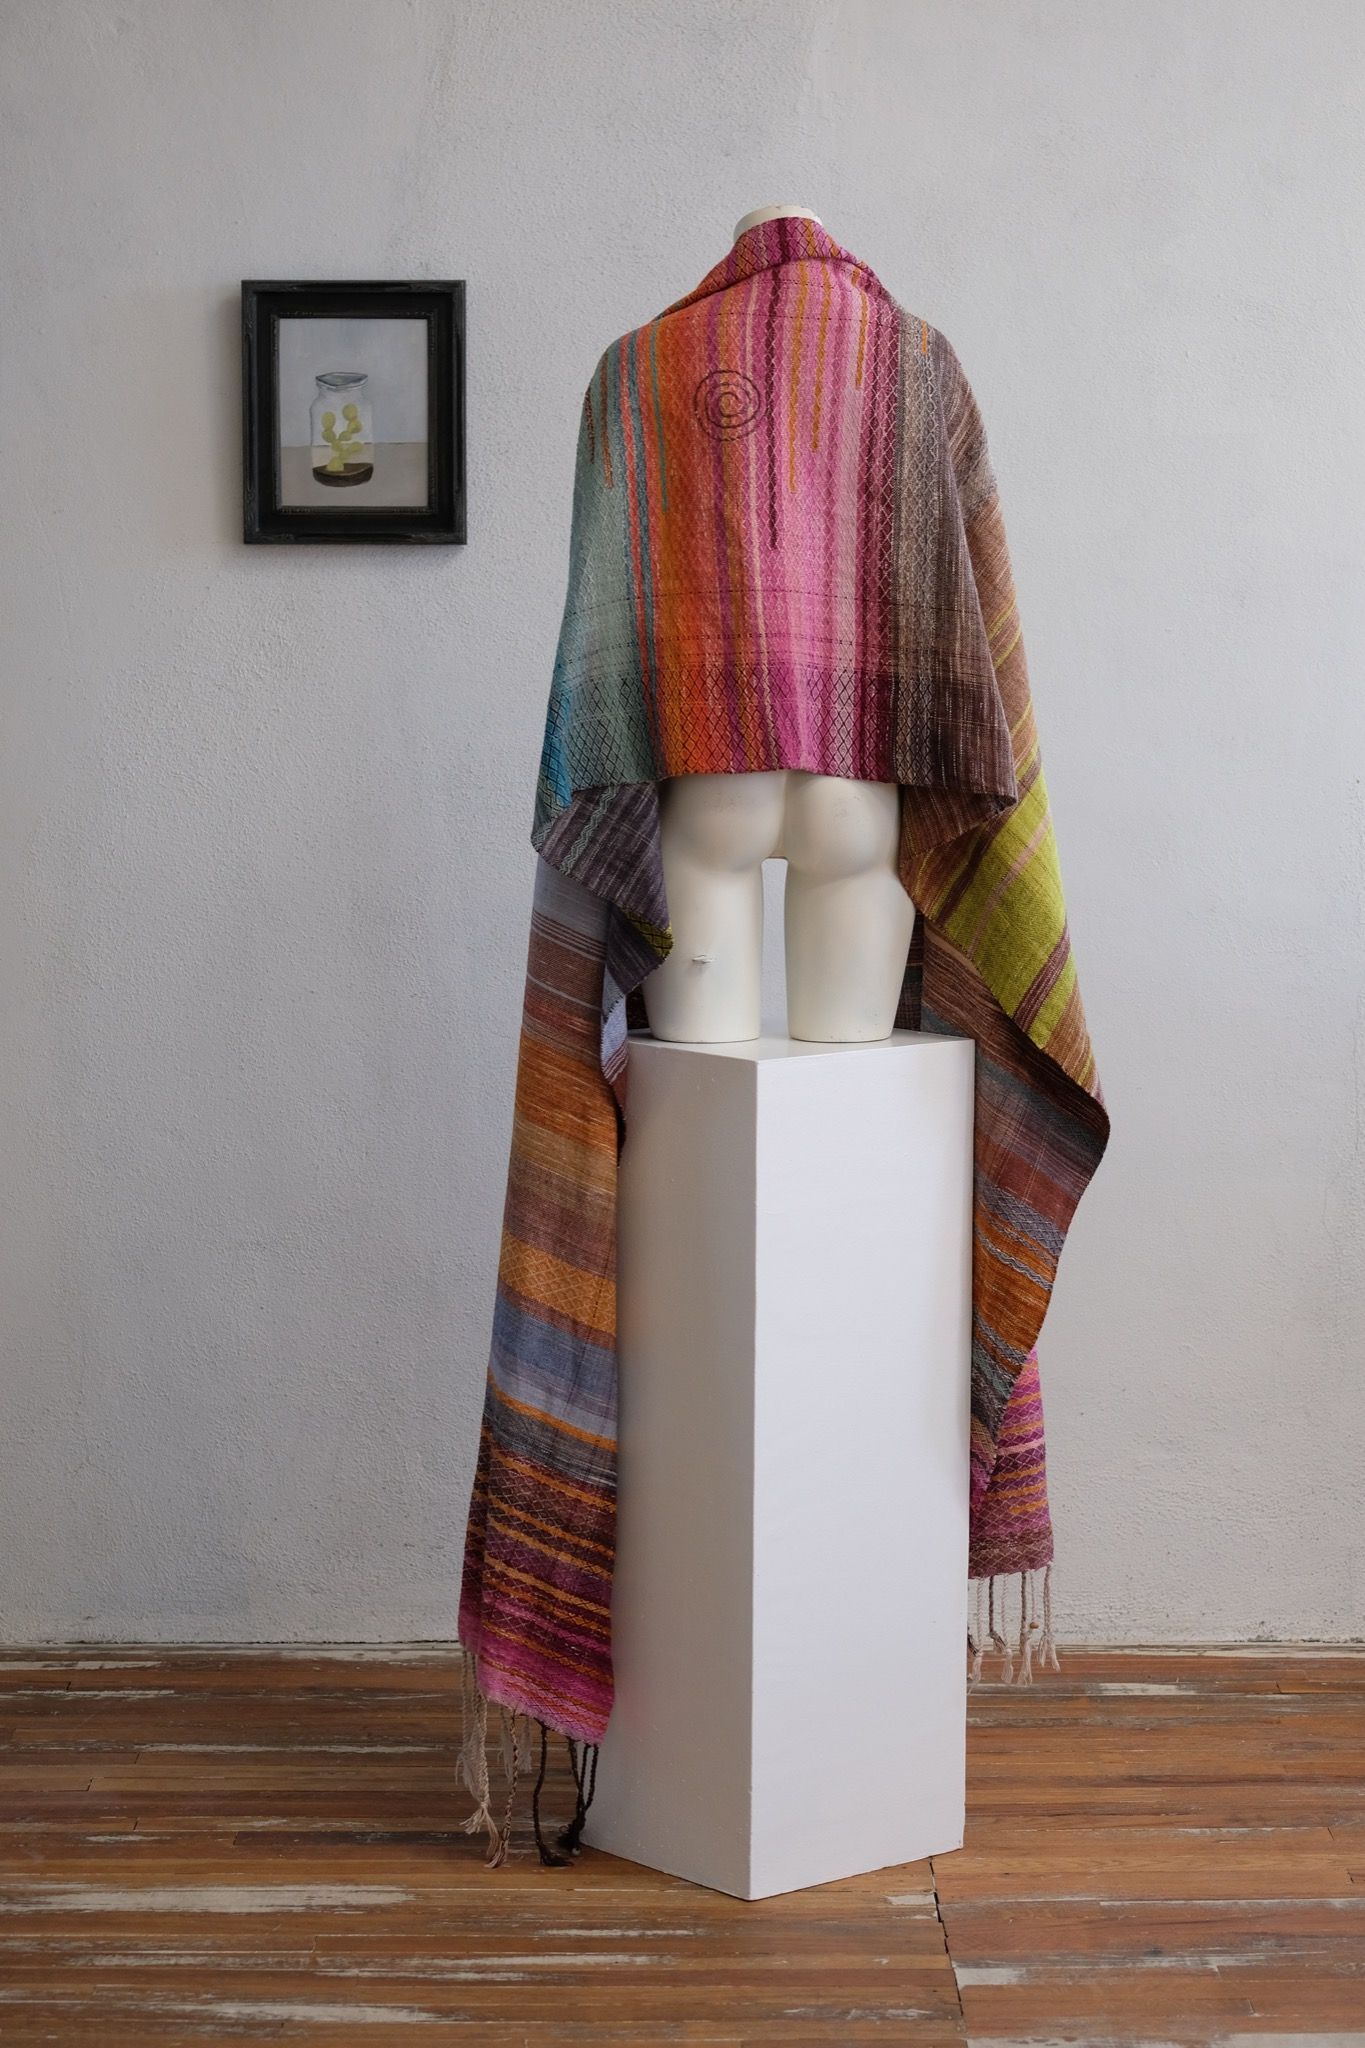 A brightly colored handwoven shawl is draped on a white mannequin in a white gallery space with wood floors.